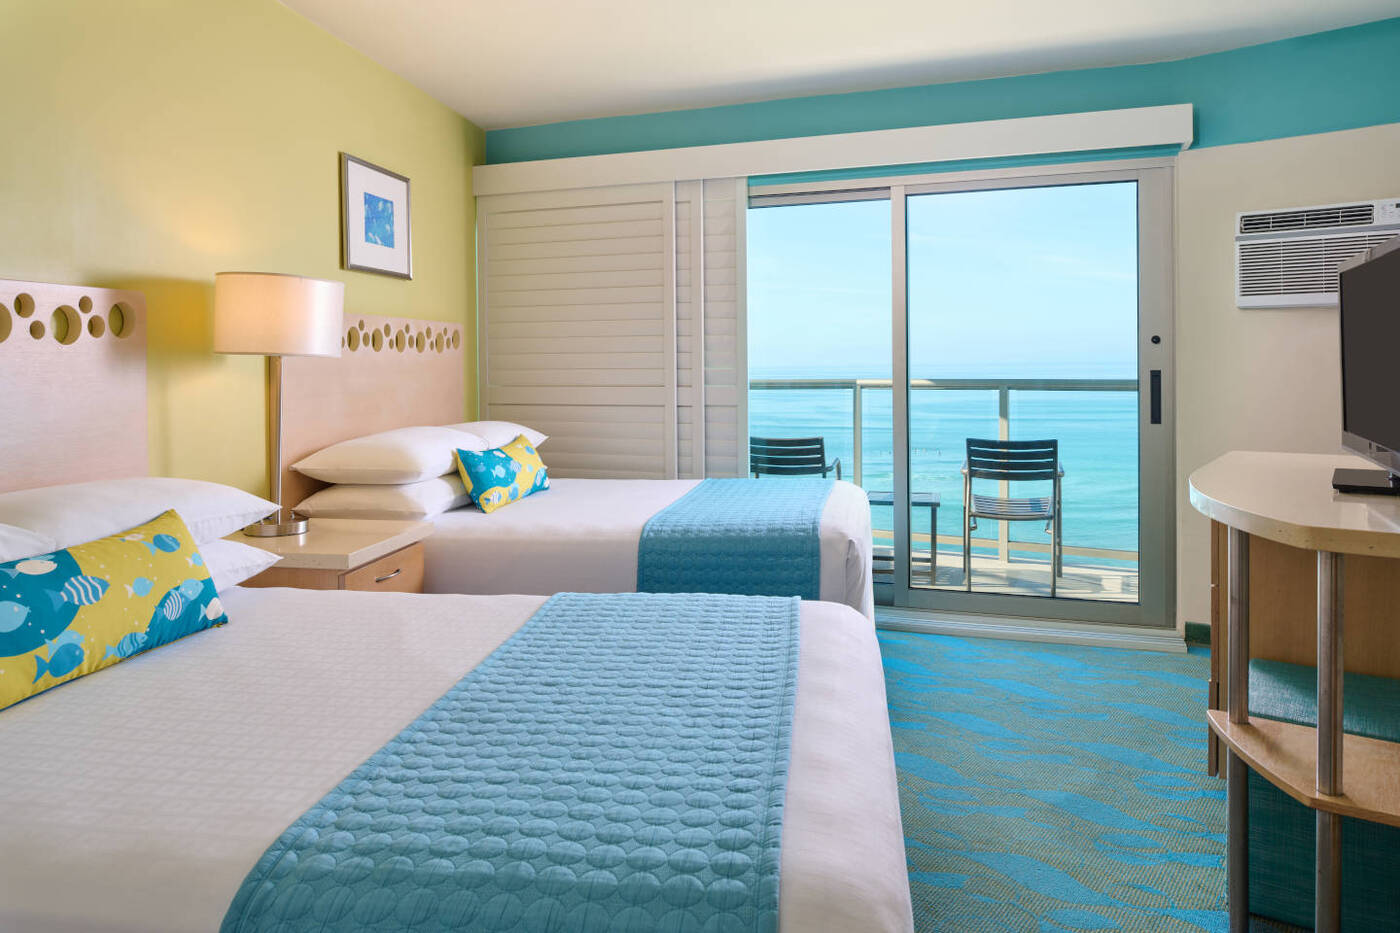 Oceanfront Deluxe Room with plantation shutters, double beds and